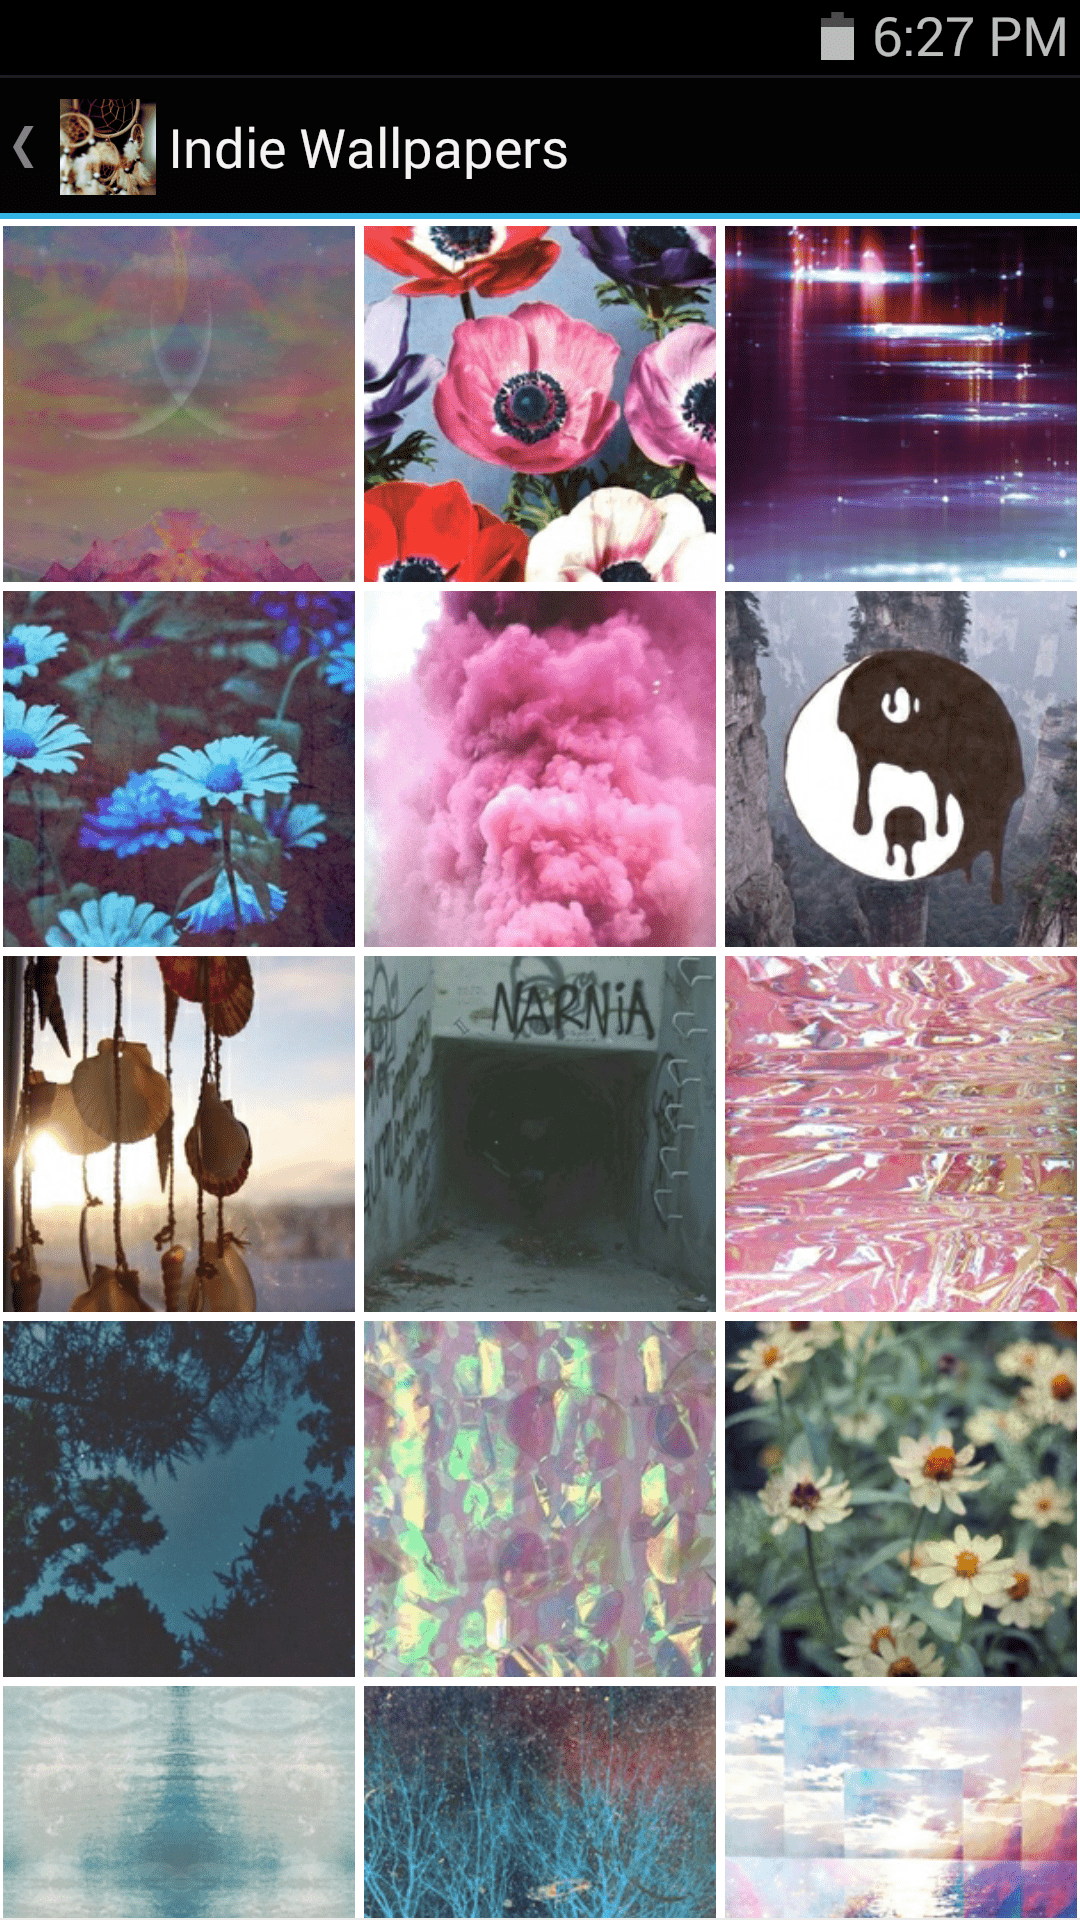 A collage of different pictures including flowers, a ying yang symbol, and a dream catcher. - Indie